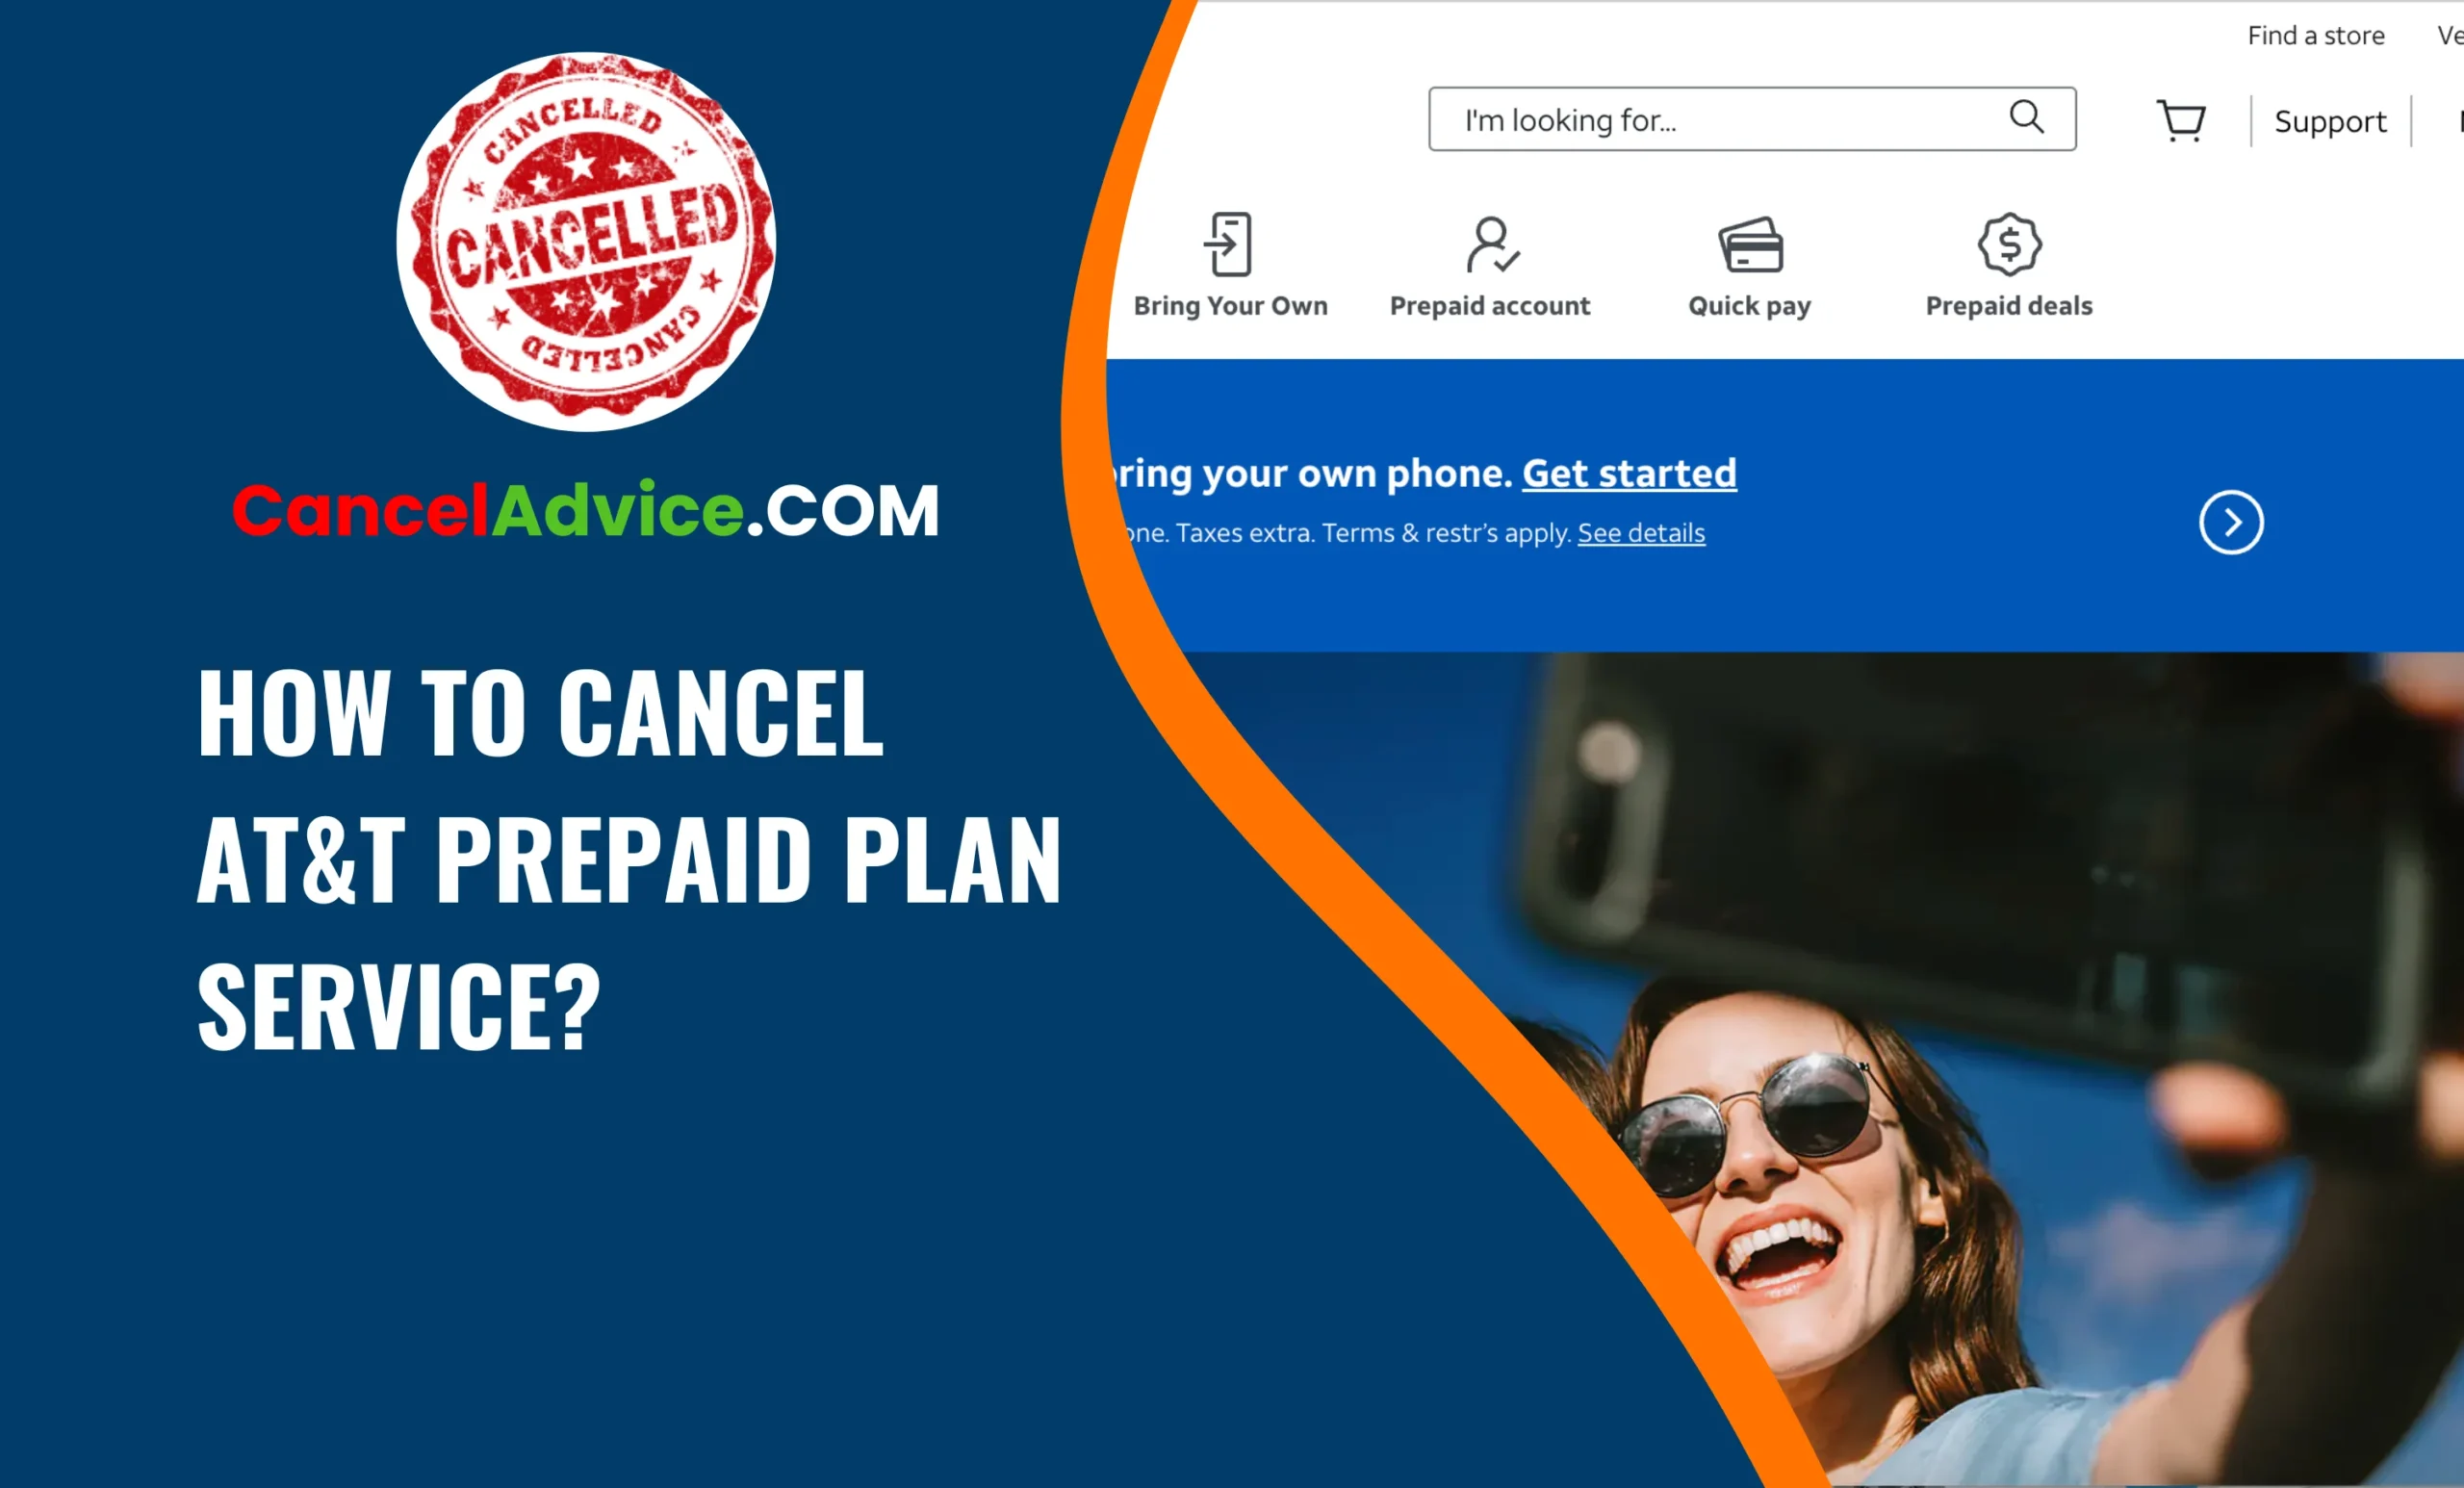 How to Cancel AT&T Prepaid Plan Service